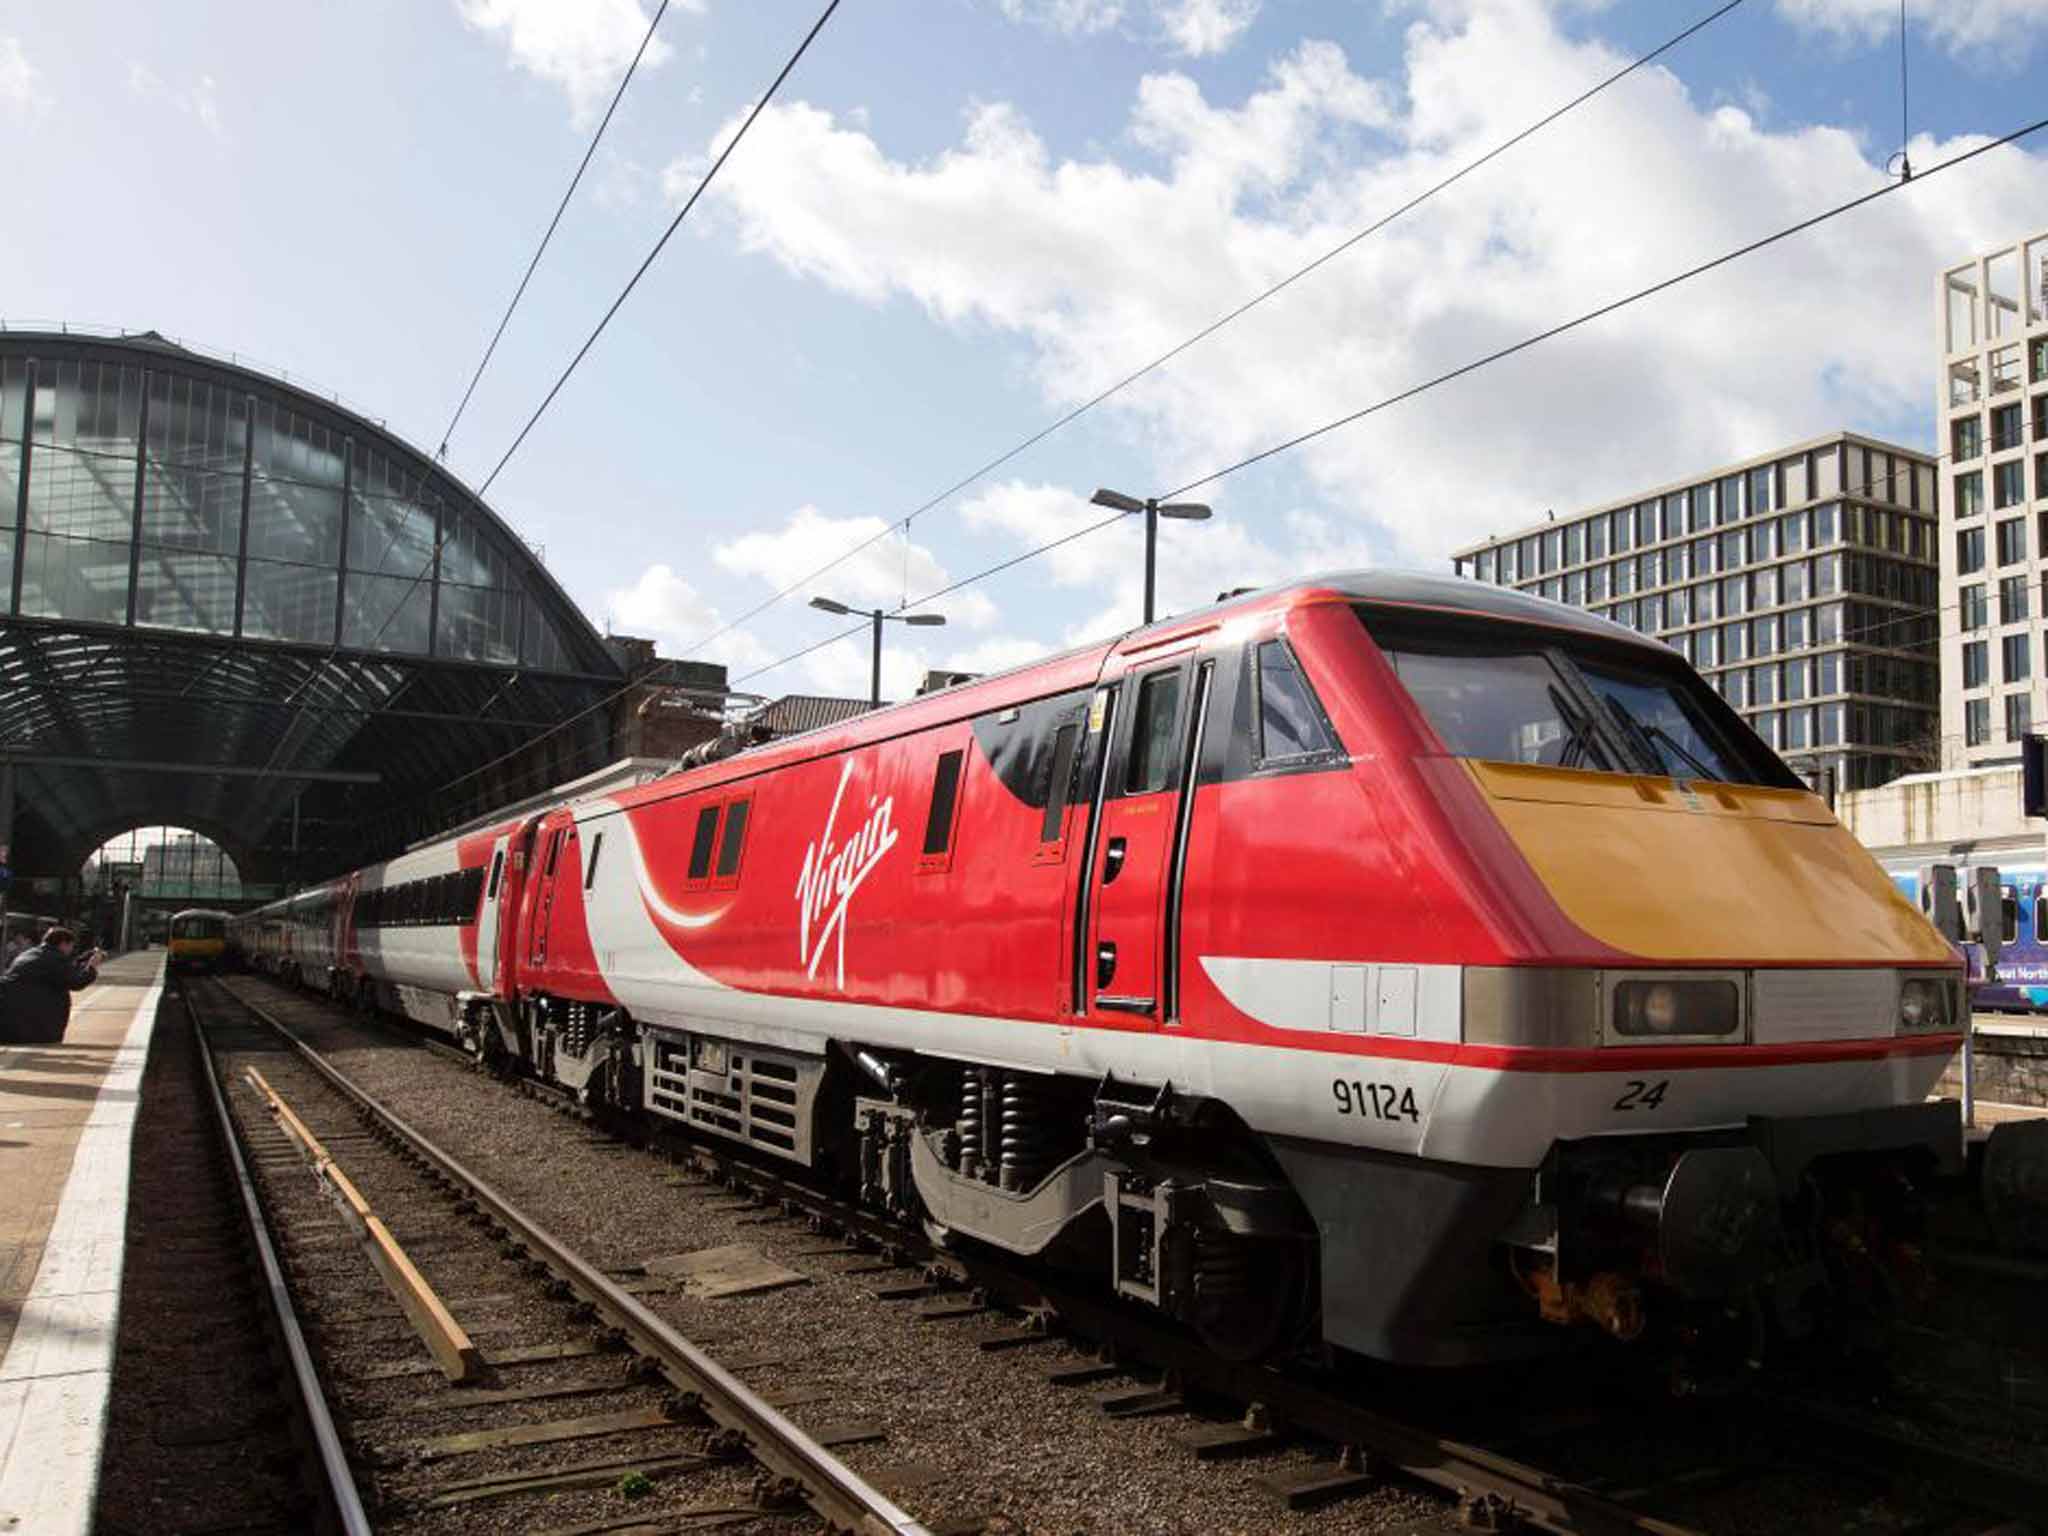 East Coast trains have been re-branded Virgin East Coast as part of the change